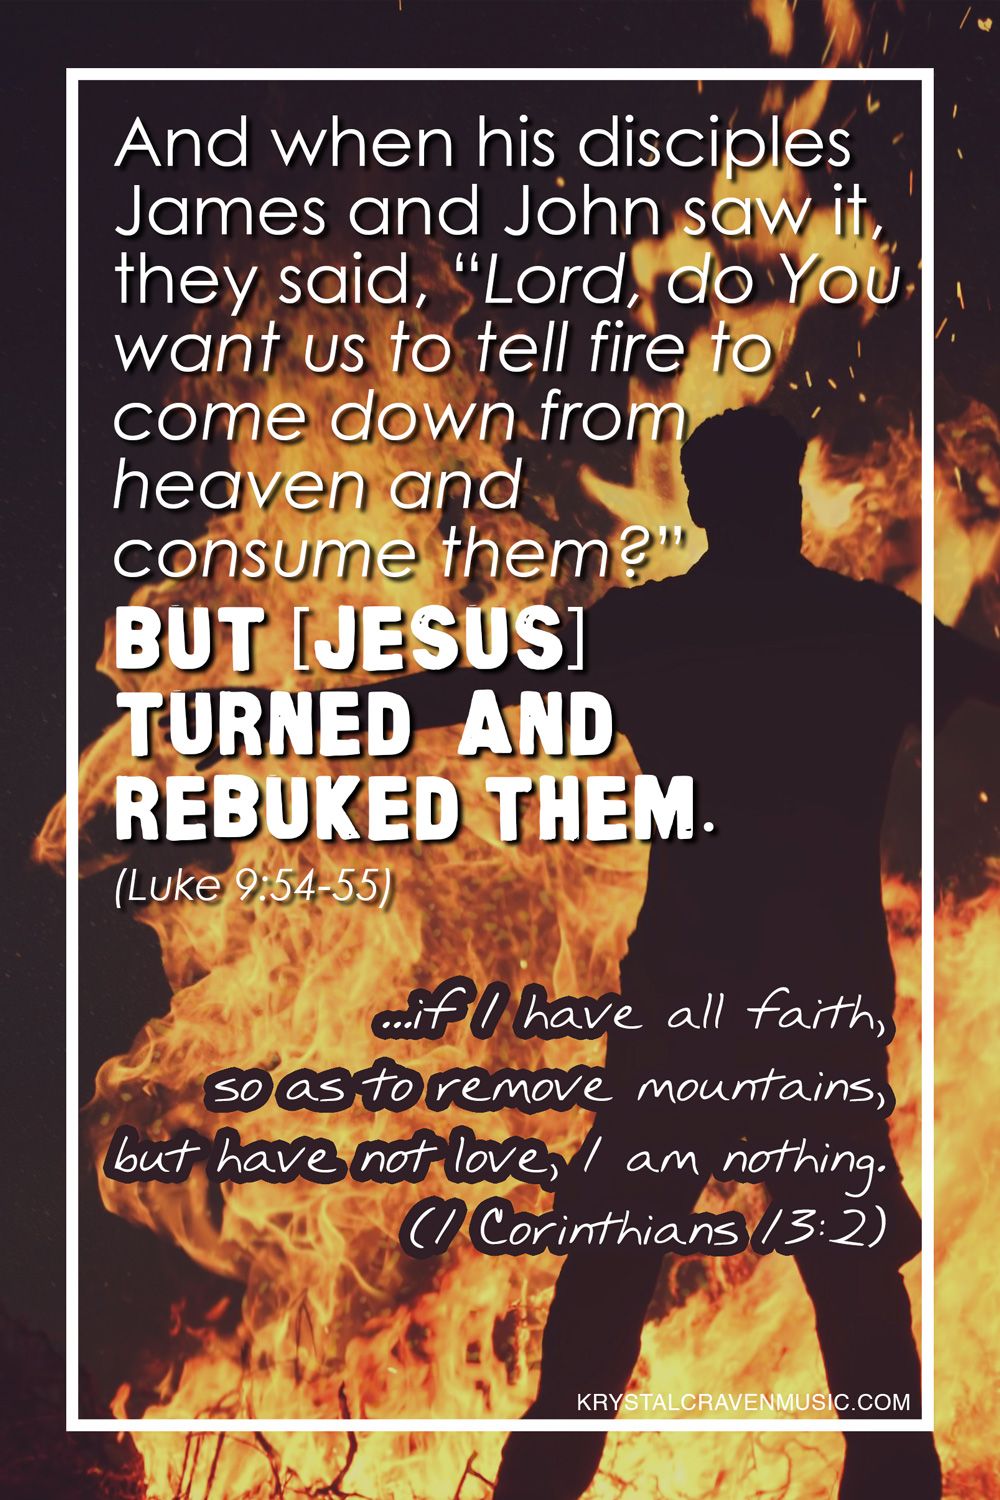 The Bible verse text from Luke 9:54-55, "And when his disciples James and John saw it, they said, “Lord, do you want us to tell fire to come down from heaven and consume them?” But [Jesus] turned and rebuked them." Along with the text from 1 Corinthians 13:2 "if I have all faith so as to remove mountains, but have not love, I am nothing". These passages are shown in white text overlaid on the silhouette of a man with his arms reaching out to his sides and standing in front of a very large fire.